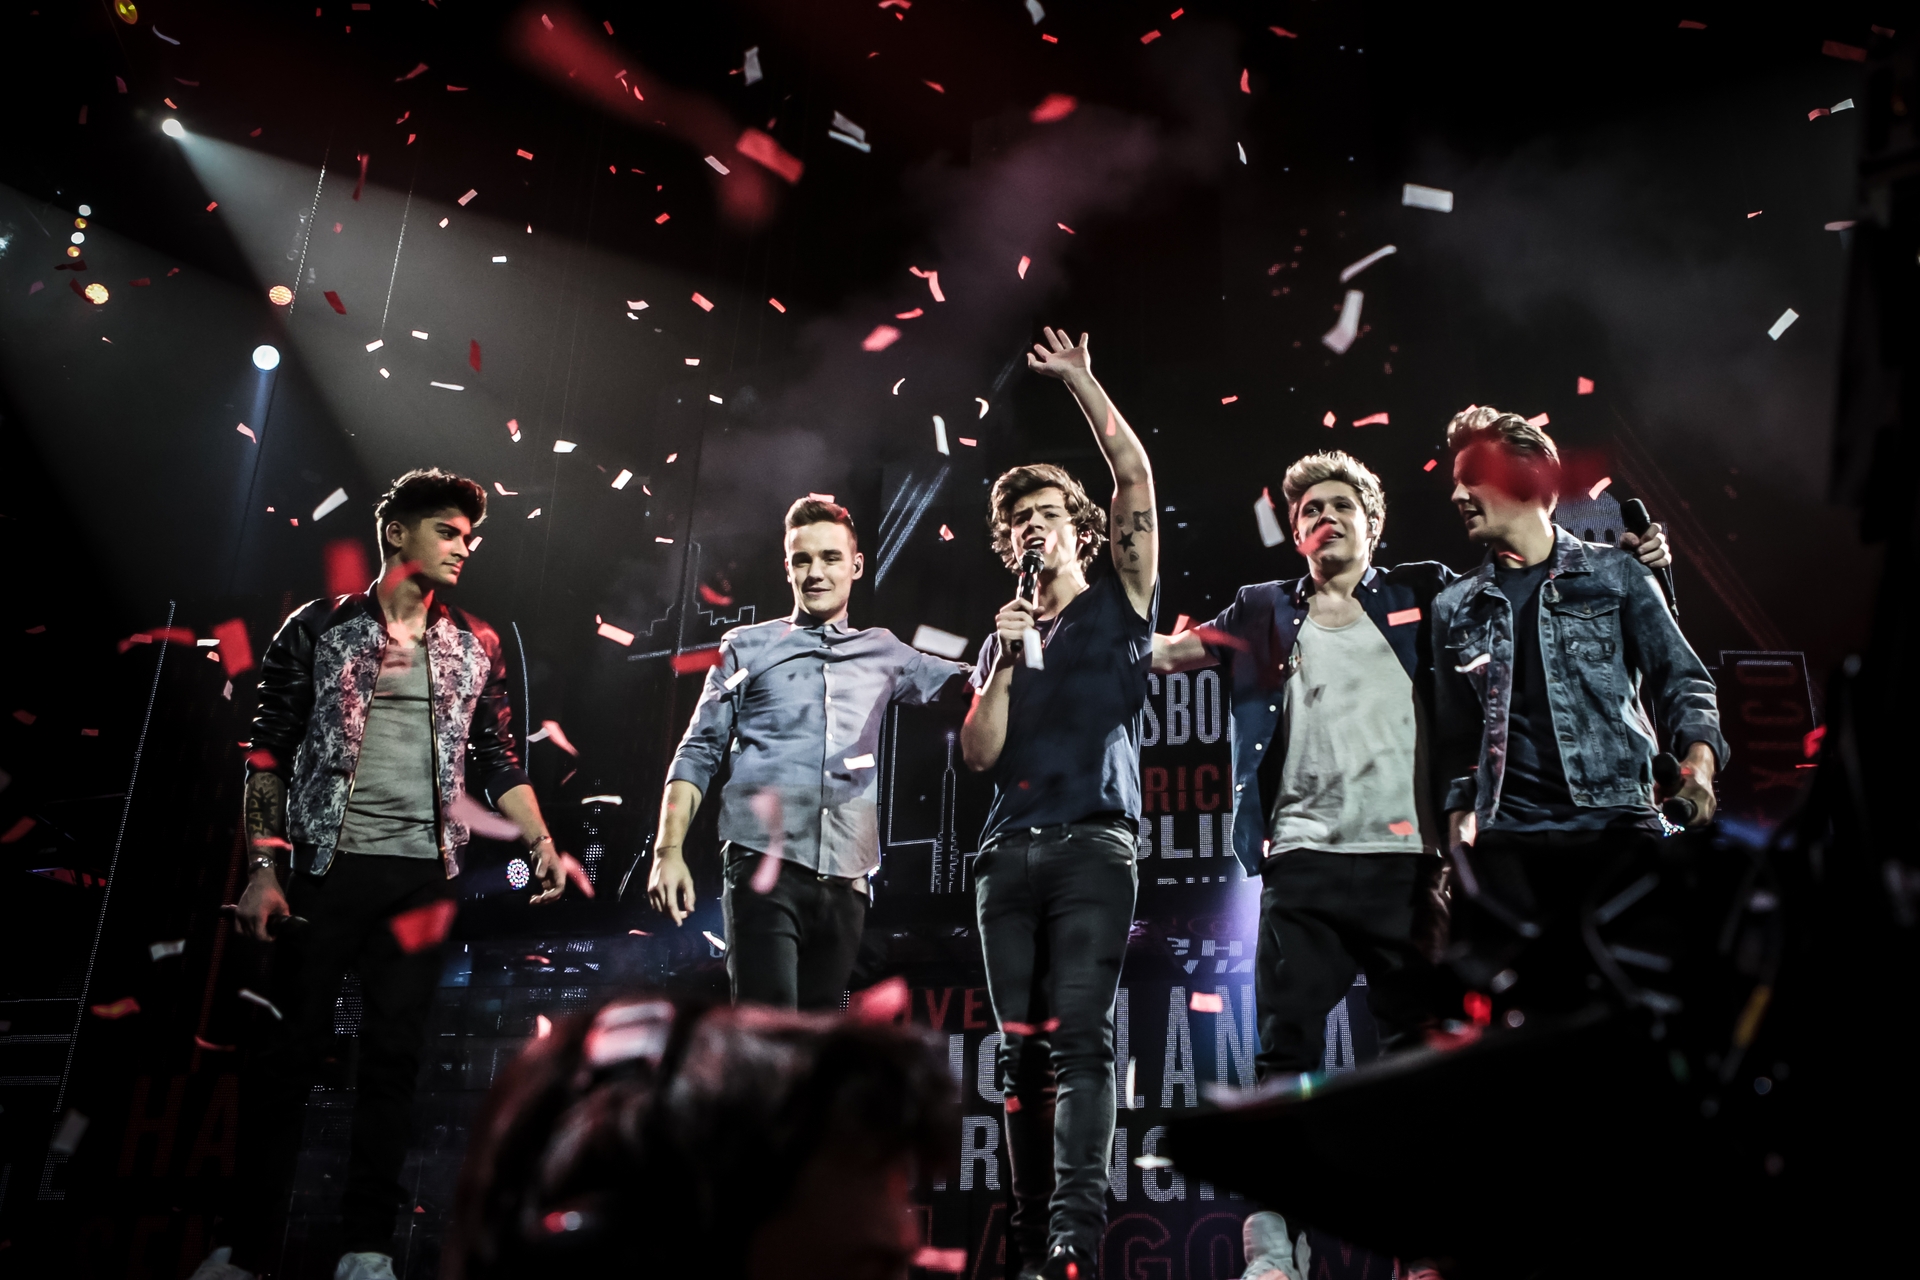 One Direction play nice in fickle world of pop - NZ Herald